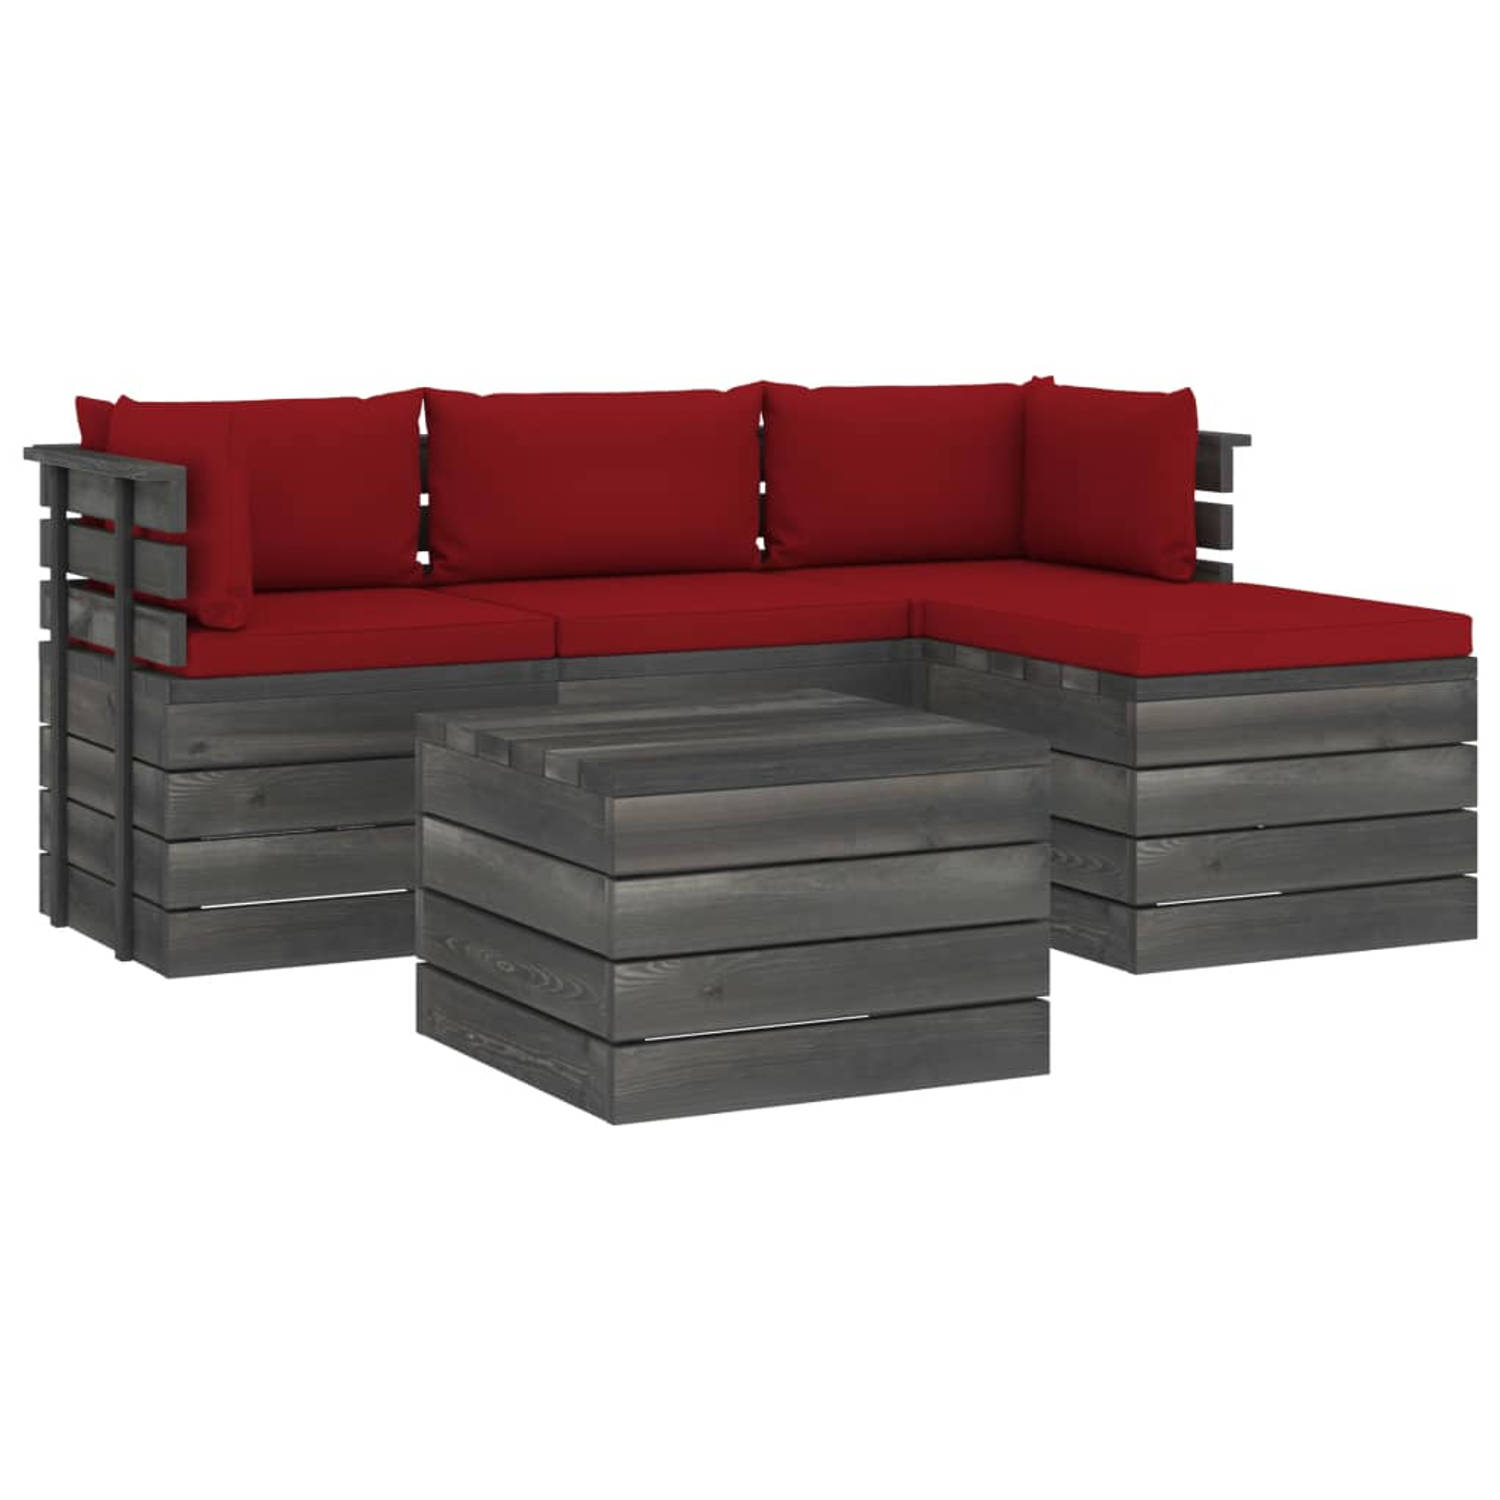 The Living Store Loungeset Pallet - Houten Tuinmeubelen - Grenenhout - Complete Set - Wijnrood - 150x71.5x65cm